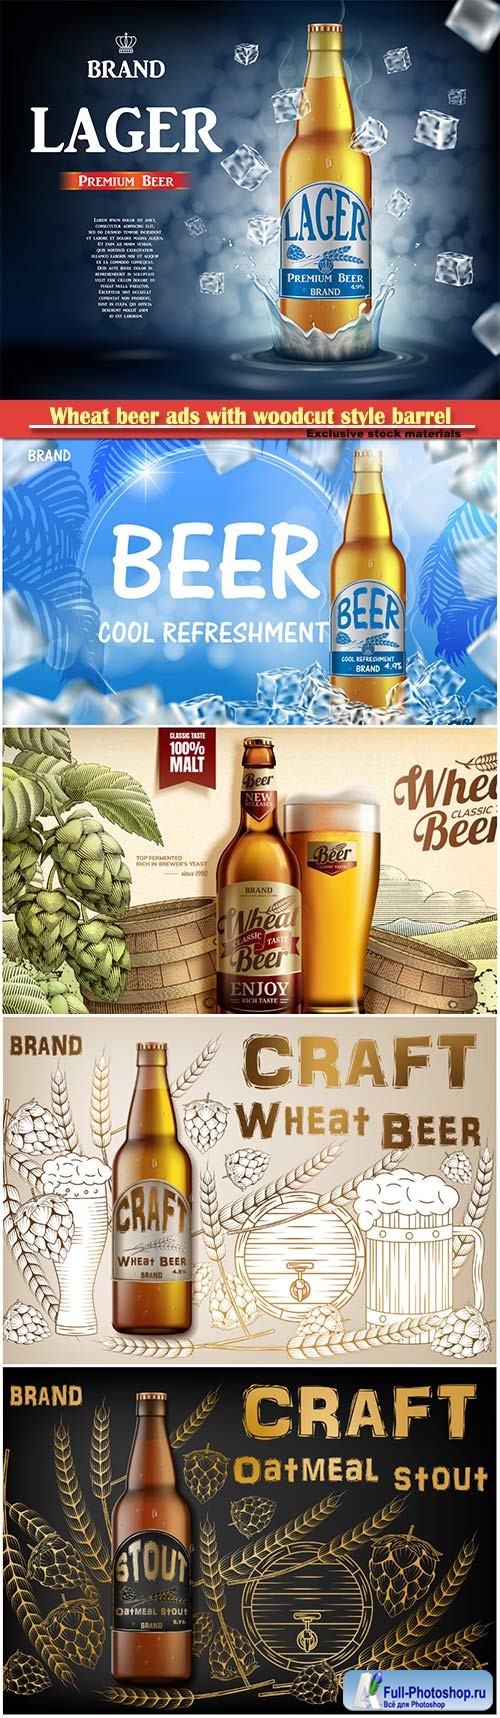 Wheat beer ads with woodcut style barrel and hops elements, 3d illustration glass bottle